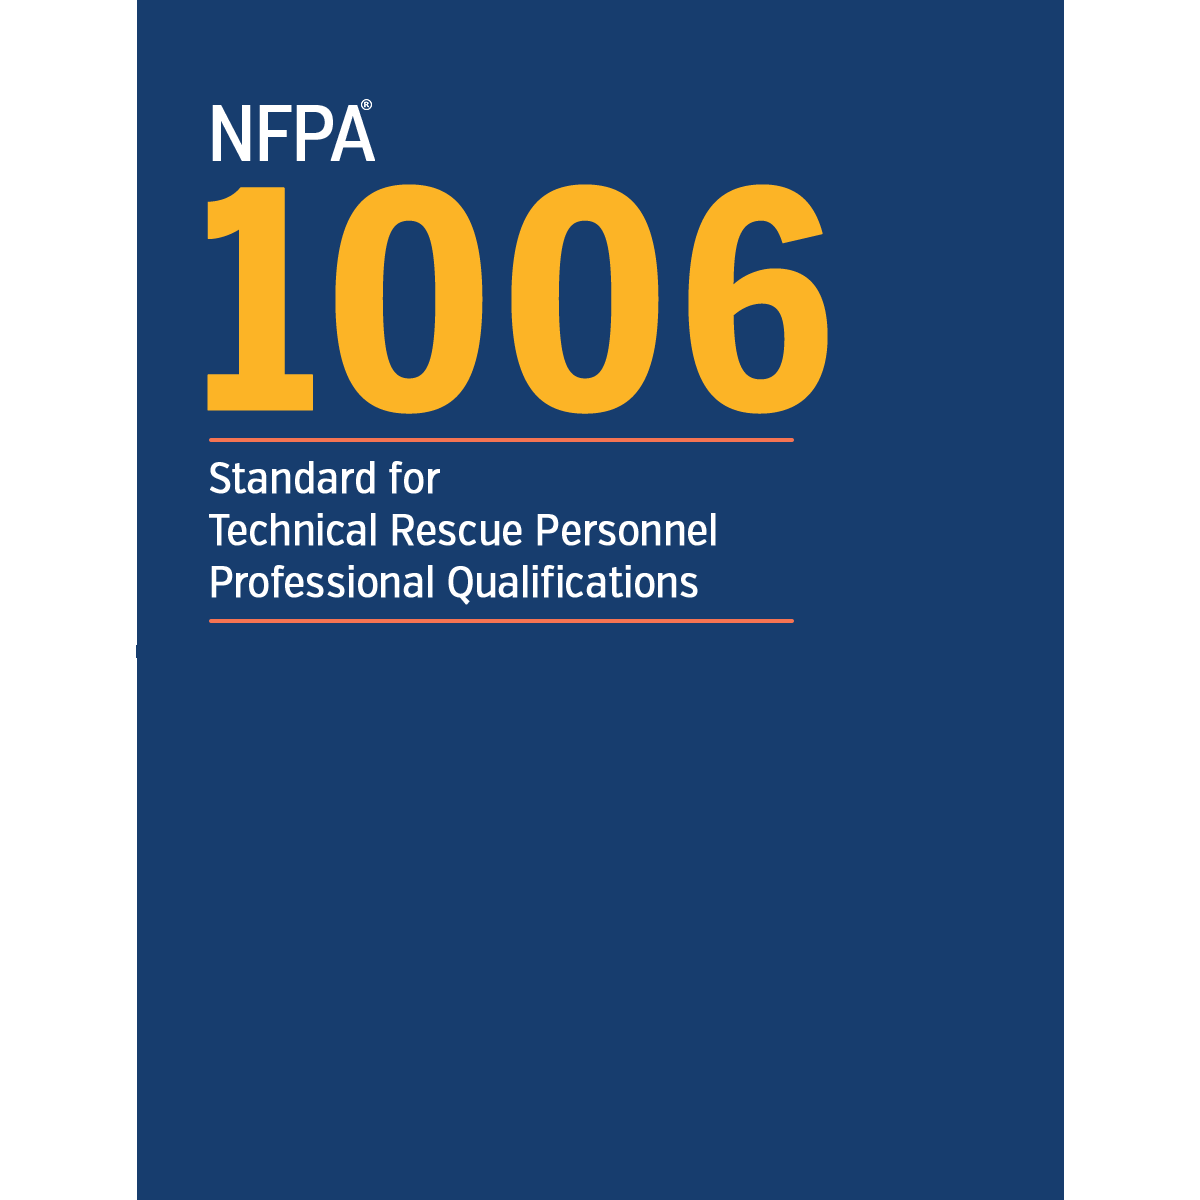 NFPA 1006 [Chapter 5] - Technical Rescuer